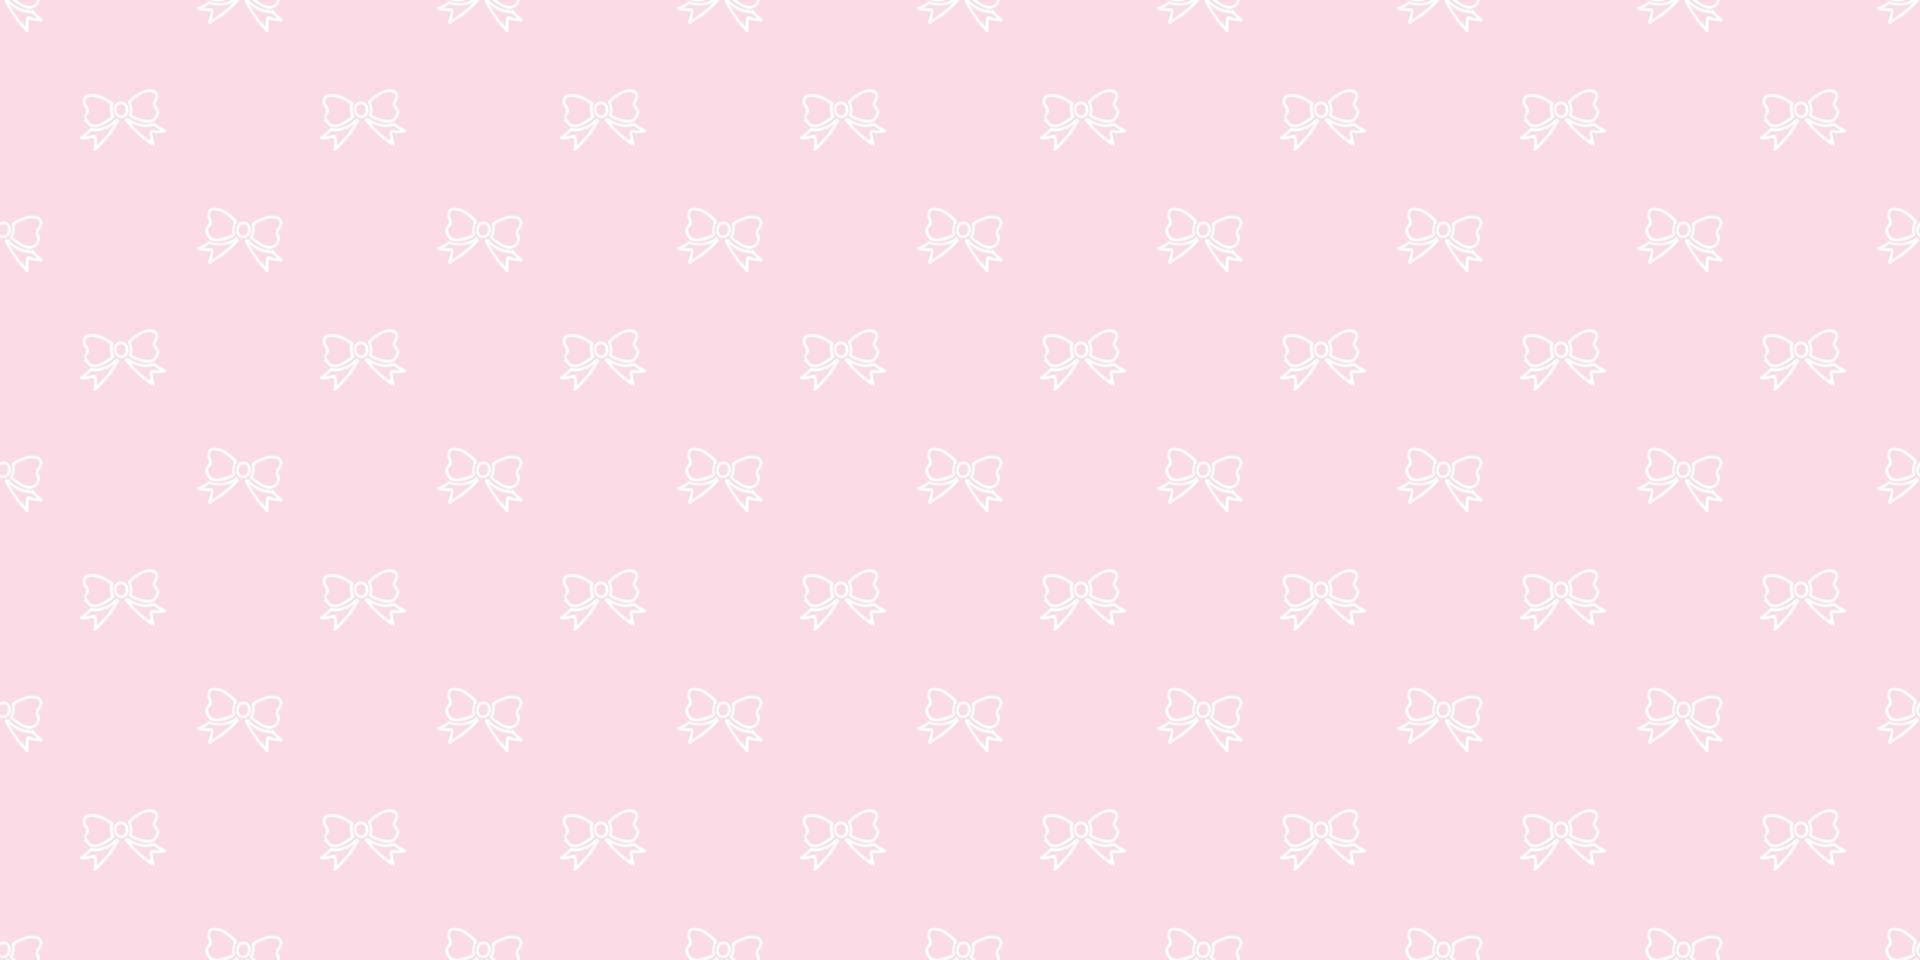 Cute bow seamless repeat pattern vector background